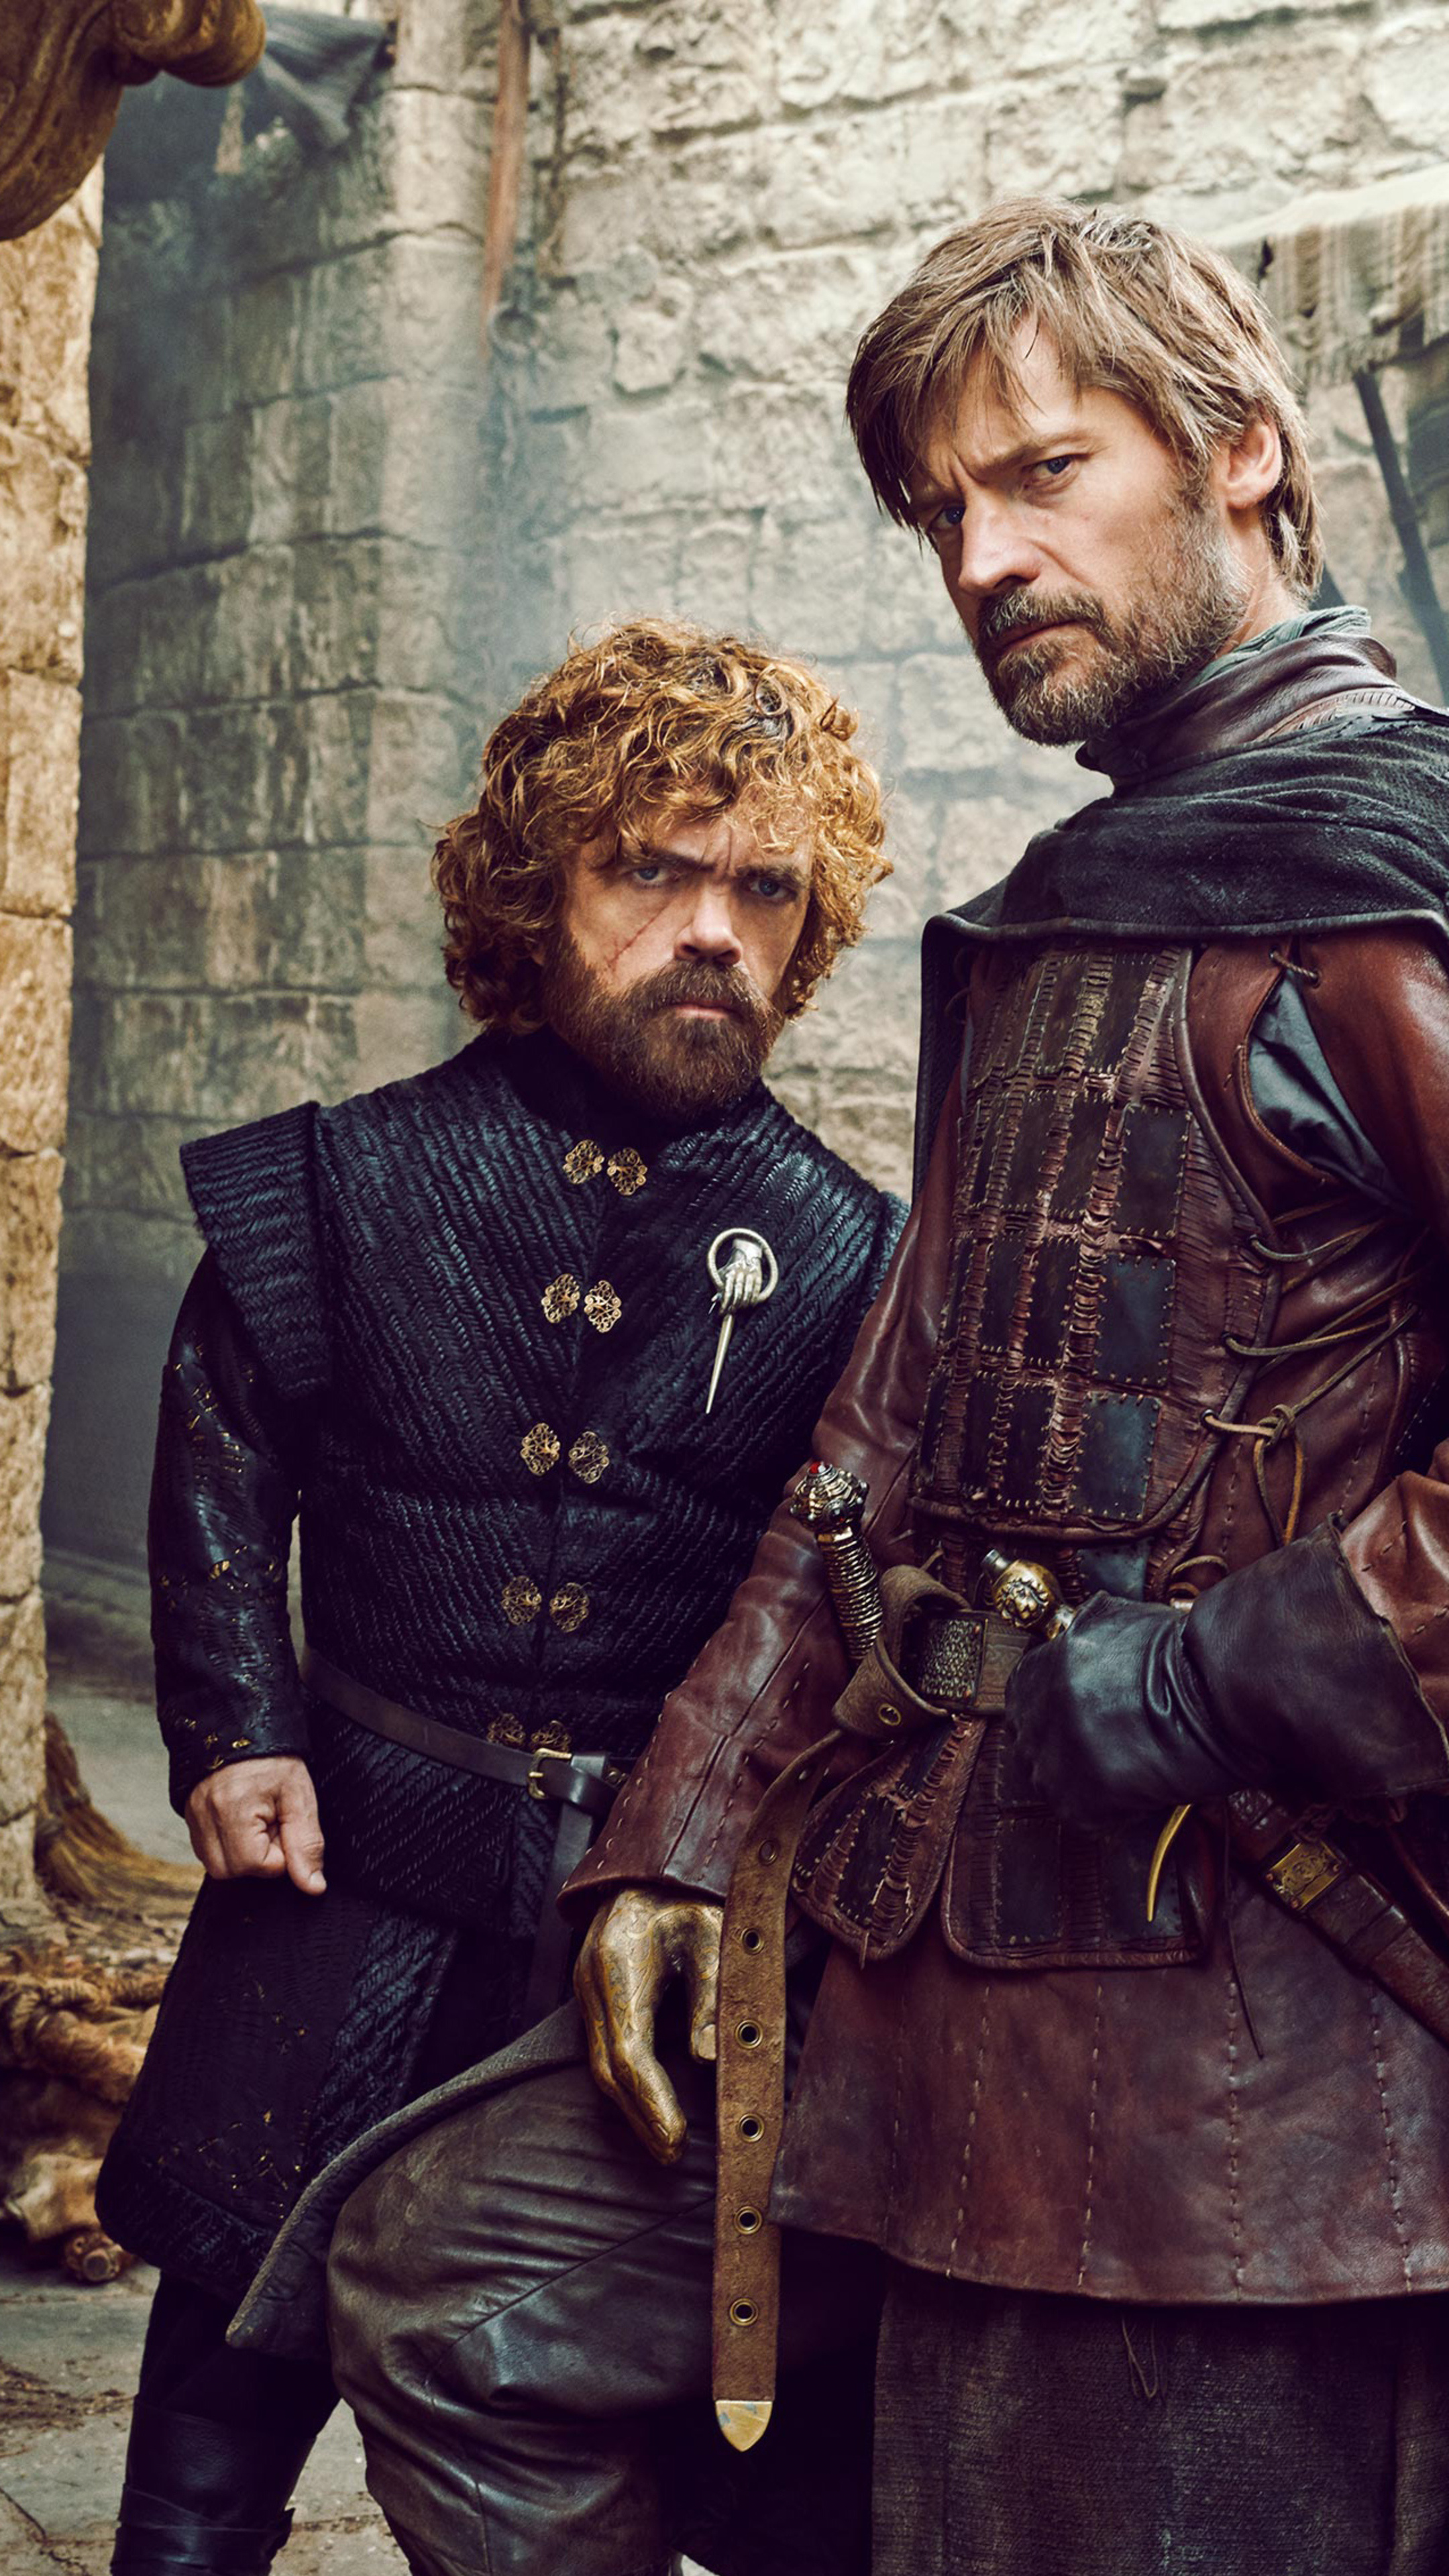 Game of Thrones, Jaime and Tyrion, Xperia wallpapers, 2160x3840 4K Handy